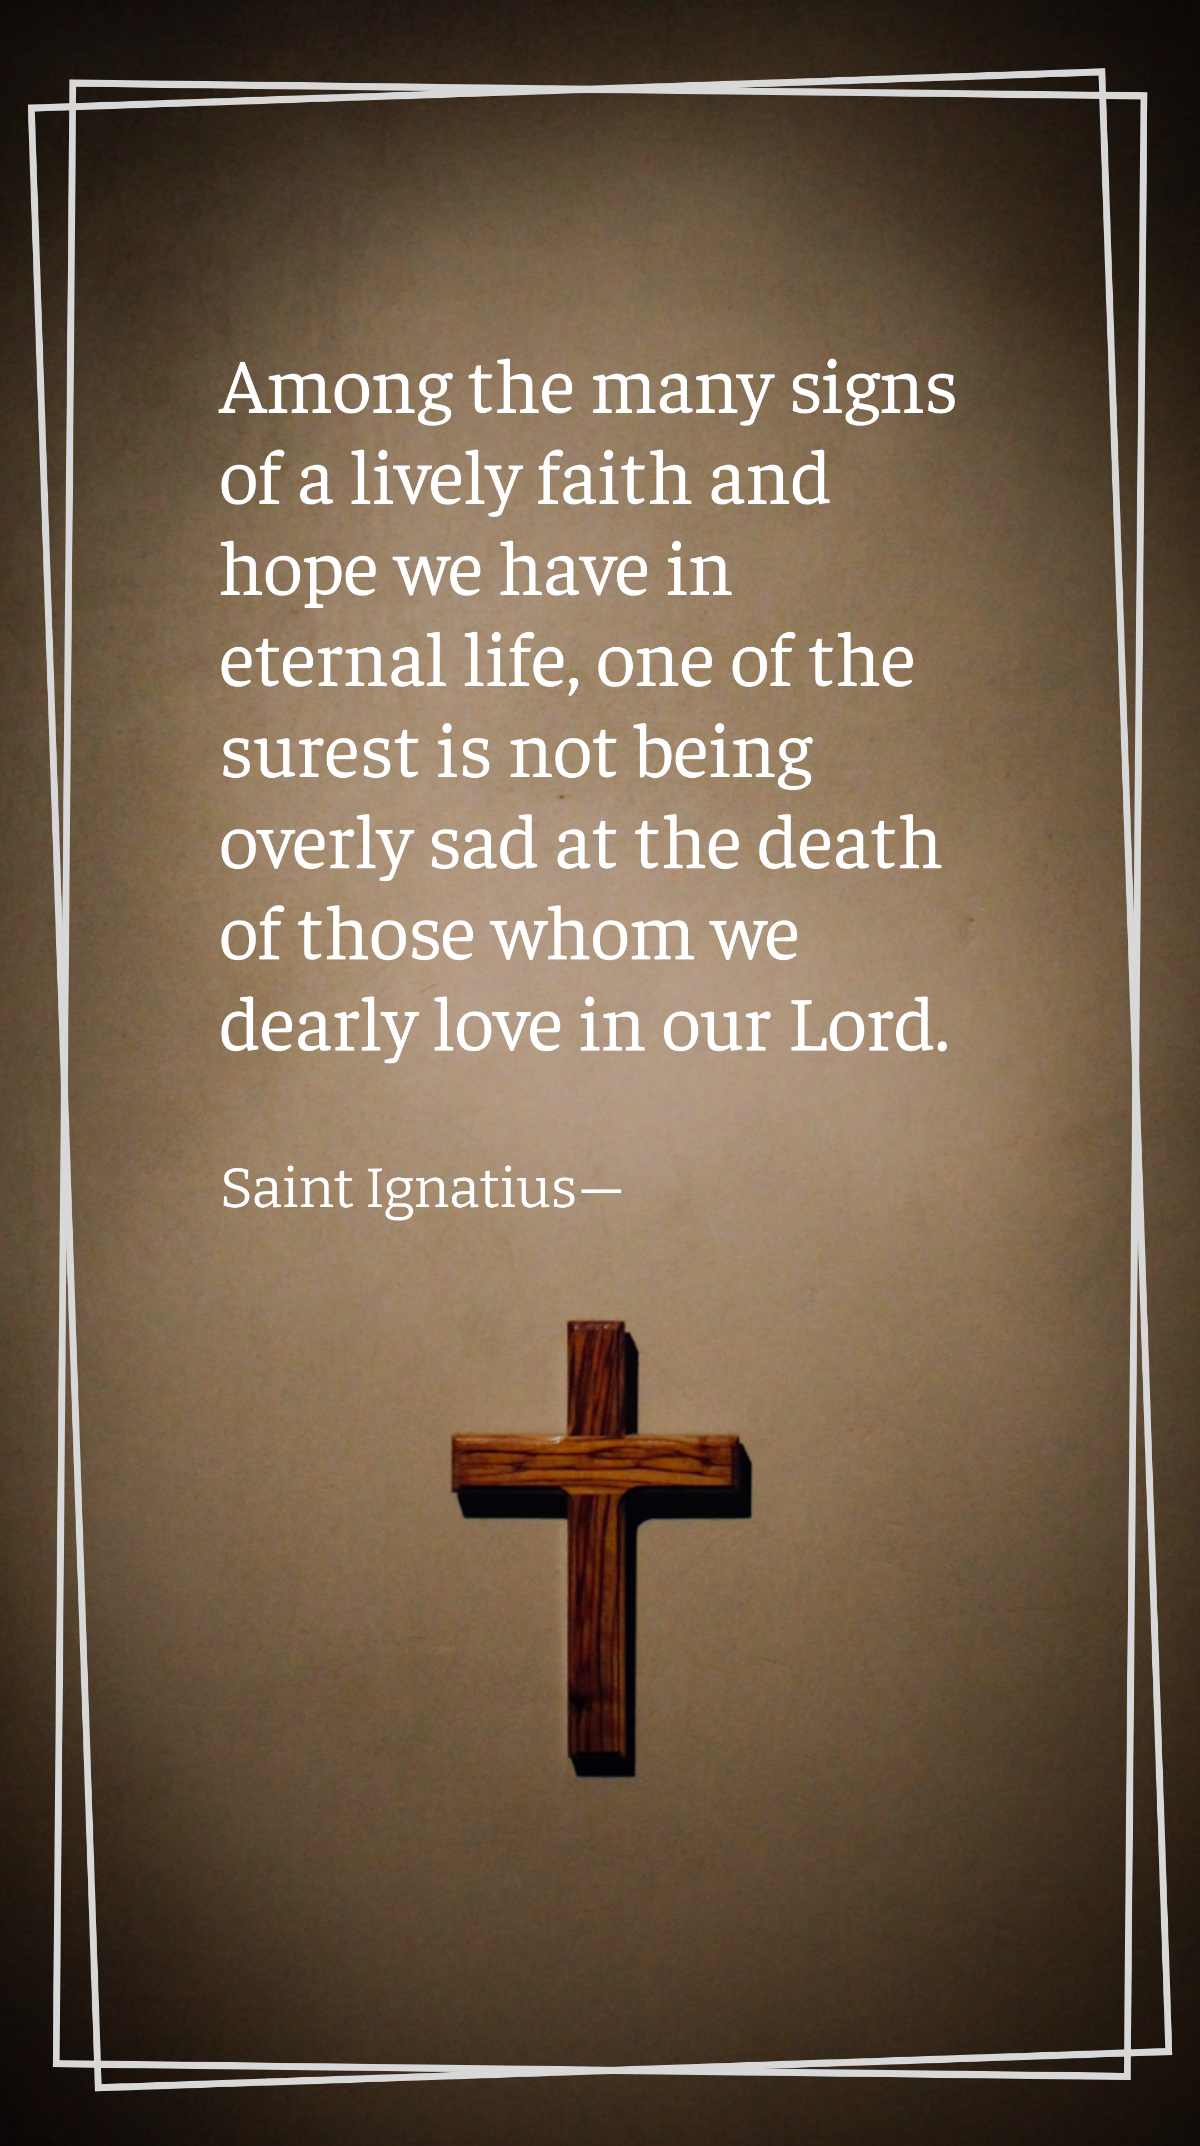 Saint Ignatius - Among the many signs of a lively faith and hope we have in eternal life, one of the surest is not being overly sad at the death of those whom we dearly love in our Lord. Template